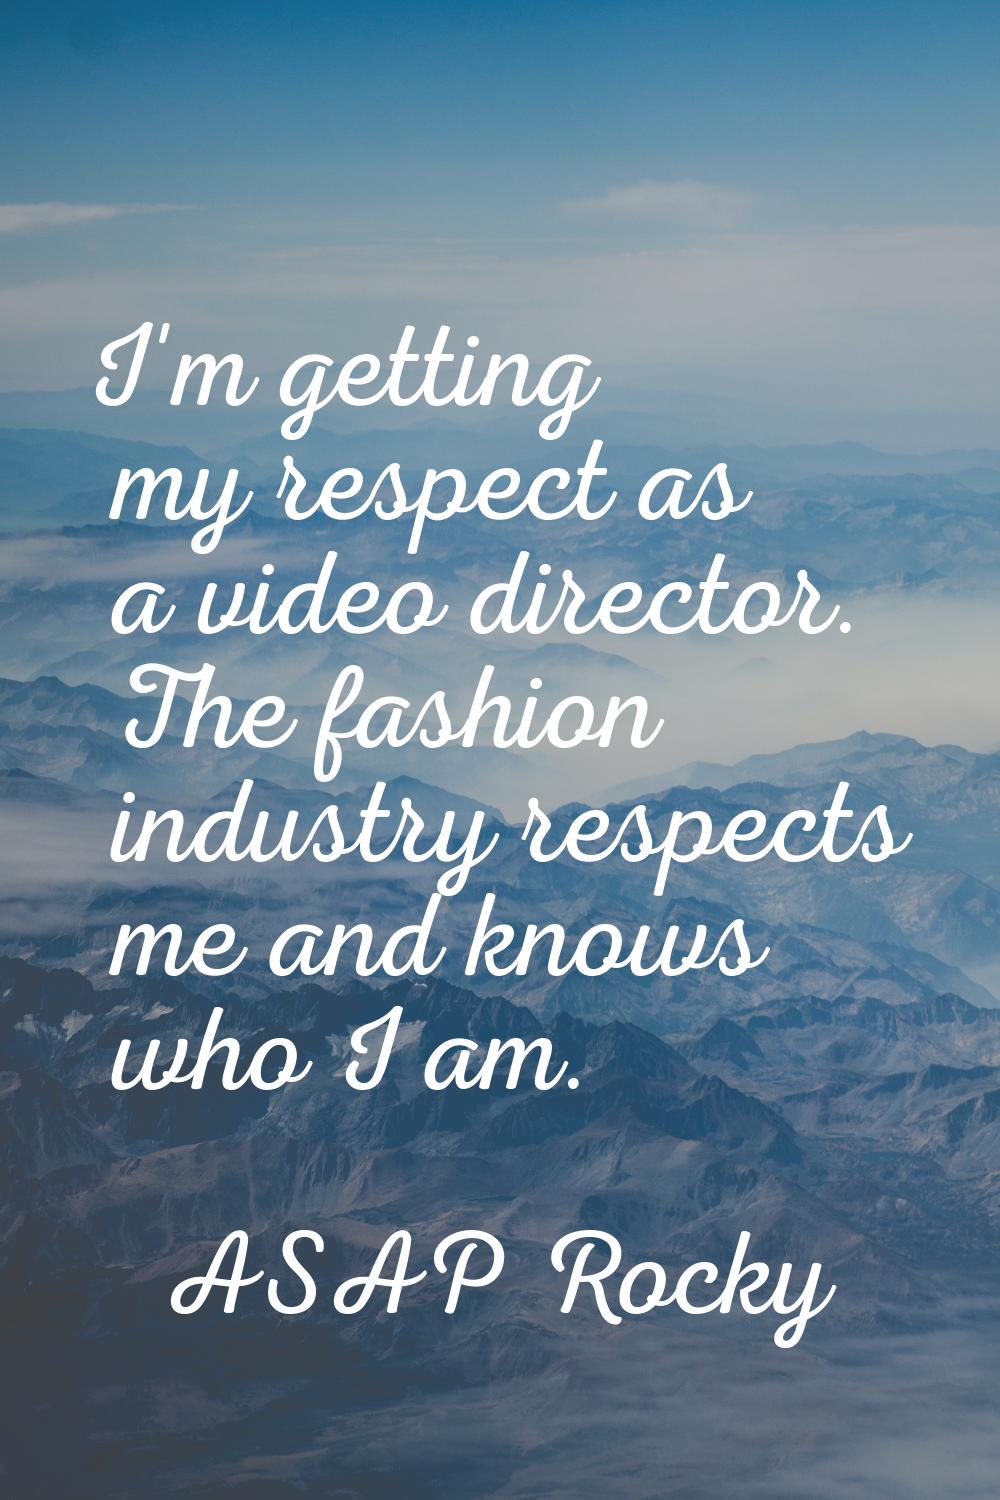 I'm getting my respect as a video director. The fashion industry respects me and knows who I am.